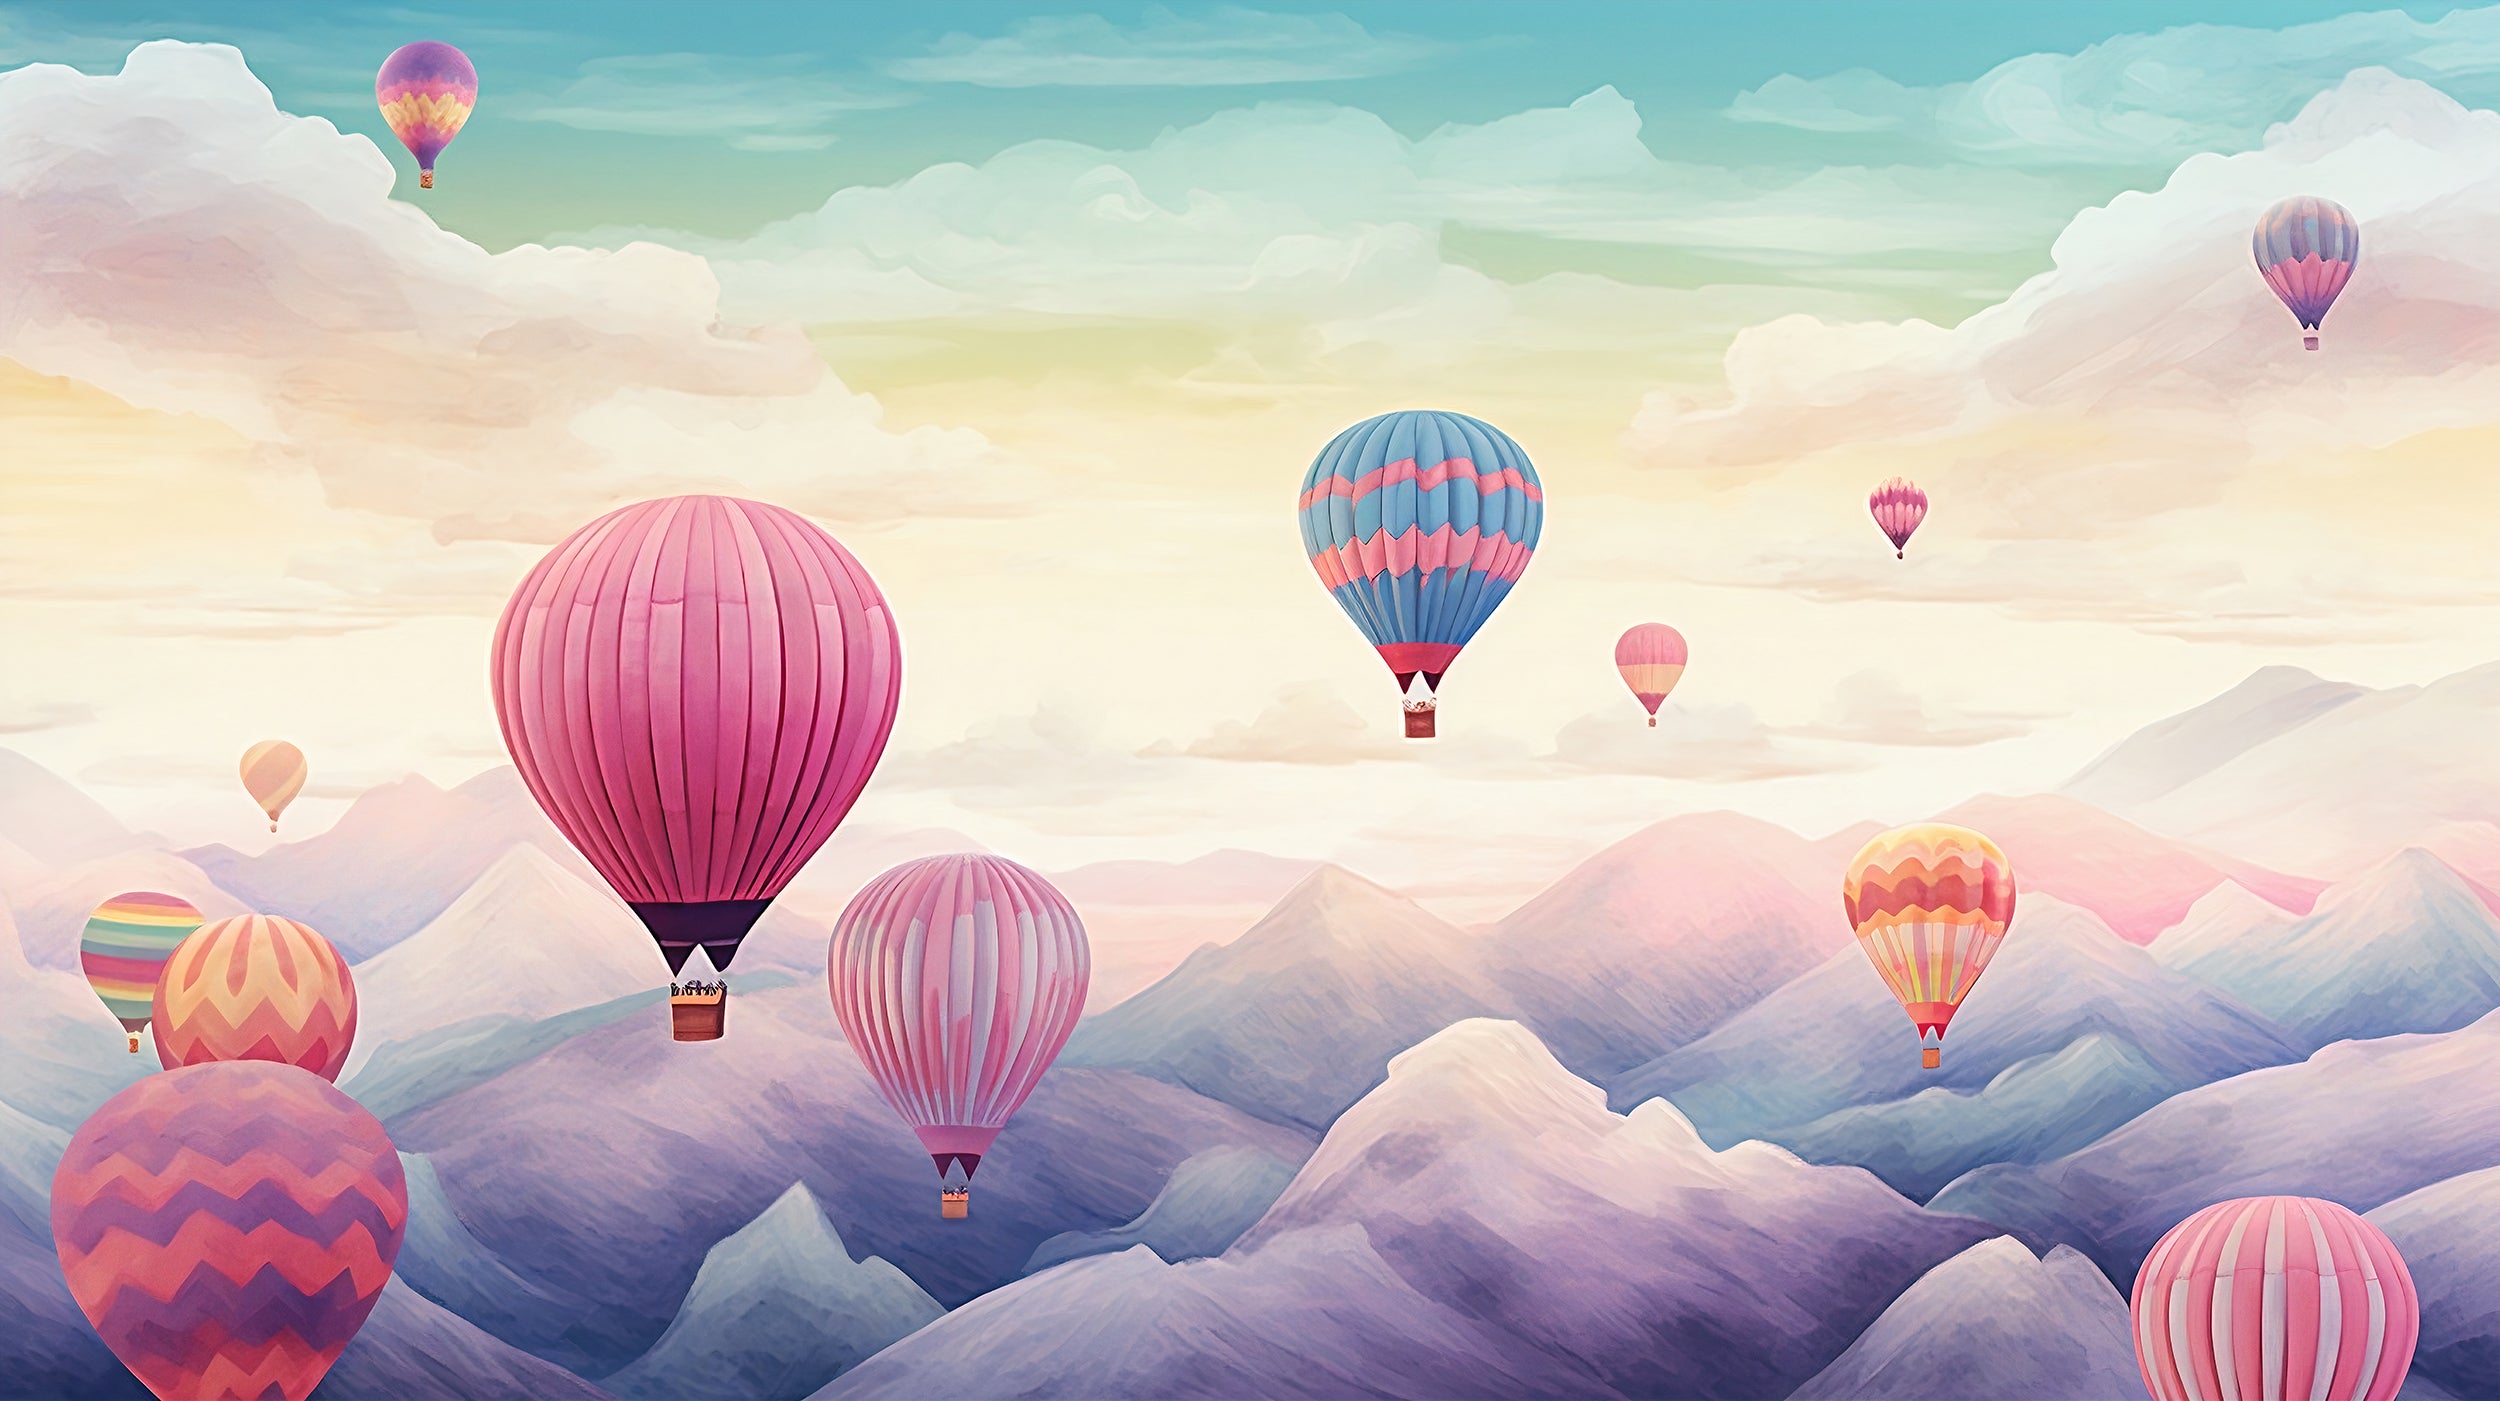 Nursery Colorful Landscape Wallpaper with Playful Balloons